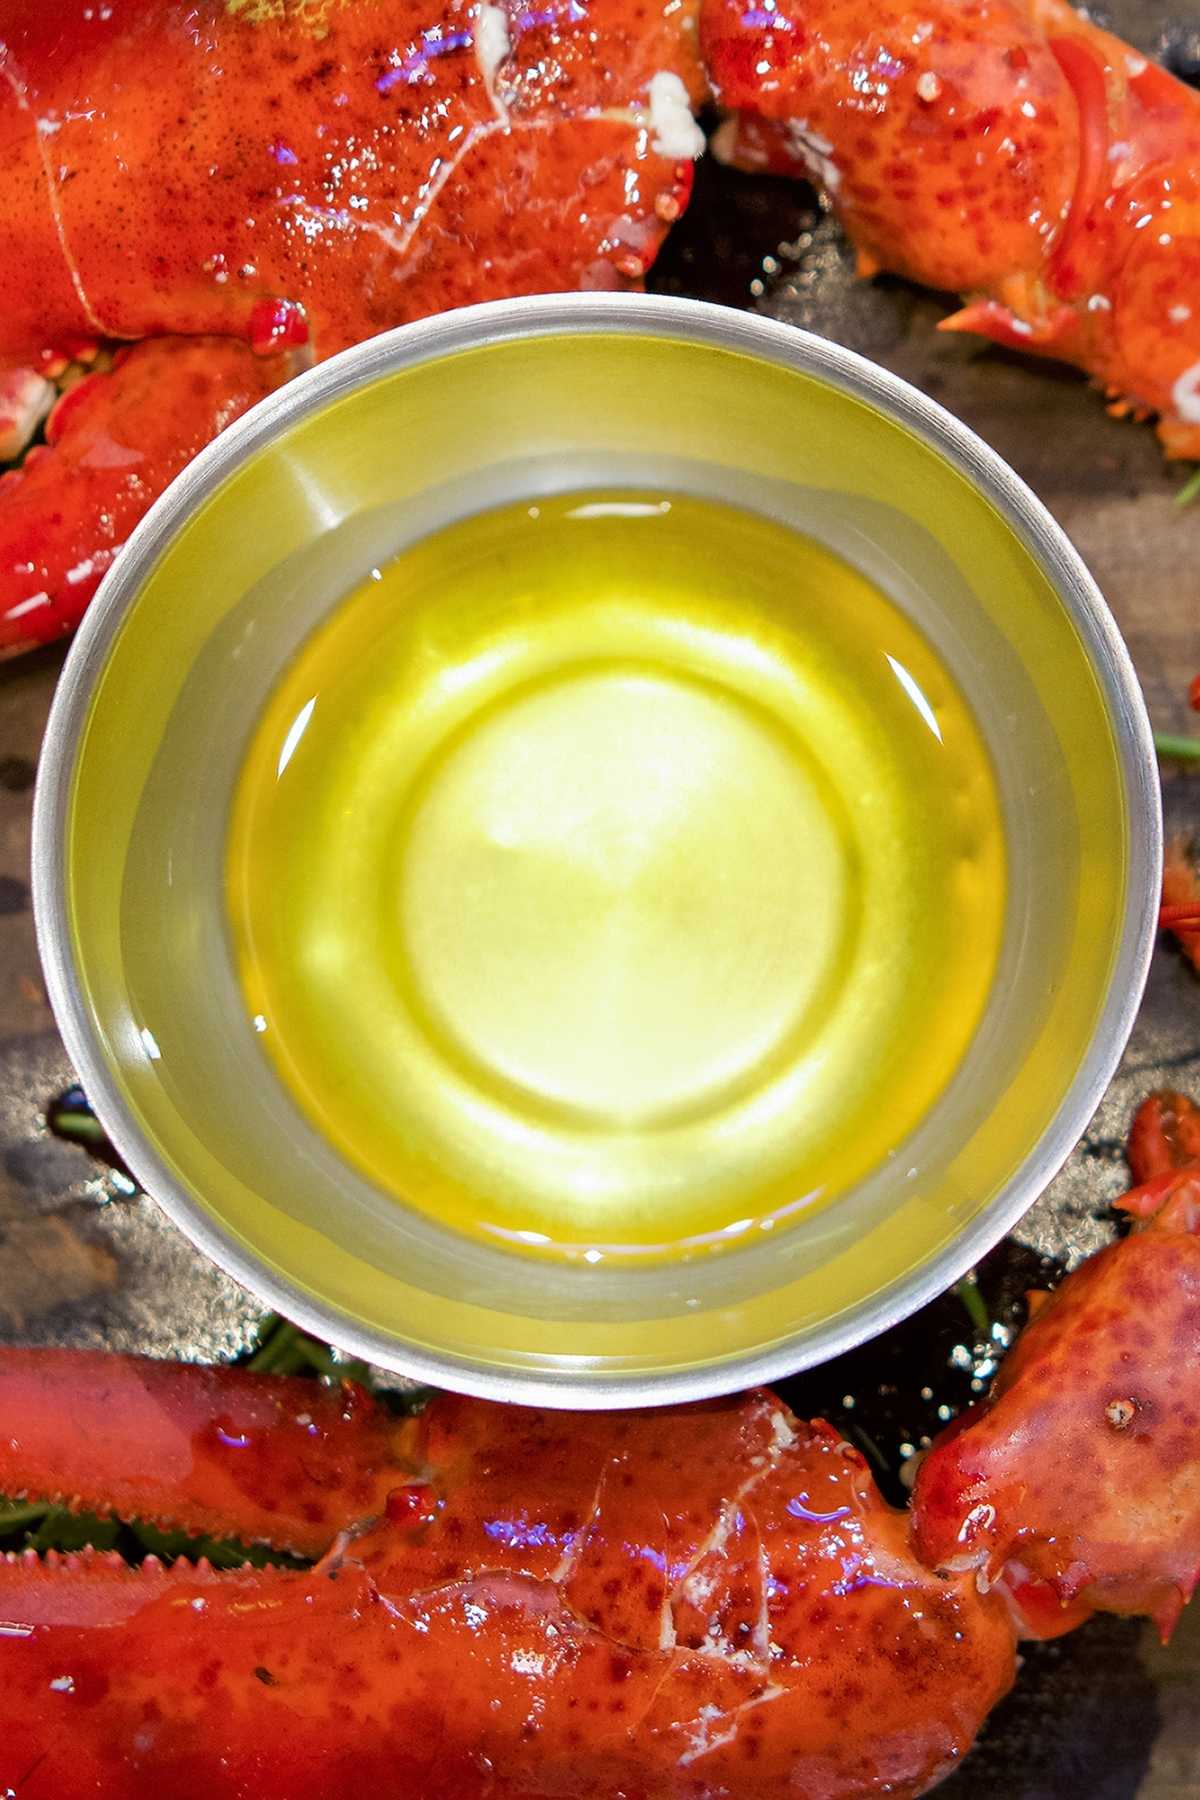 Are you familiar with the term Drawn Butter? Many people haven’t heard of it before, or if they have, are unsure of what it’s referring to. Essentially, drawn butter is melted butter. In fact, if you’re a fan of lobster or crab, you may have dipped it into a bowl of drawn butter before biting into it.